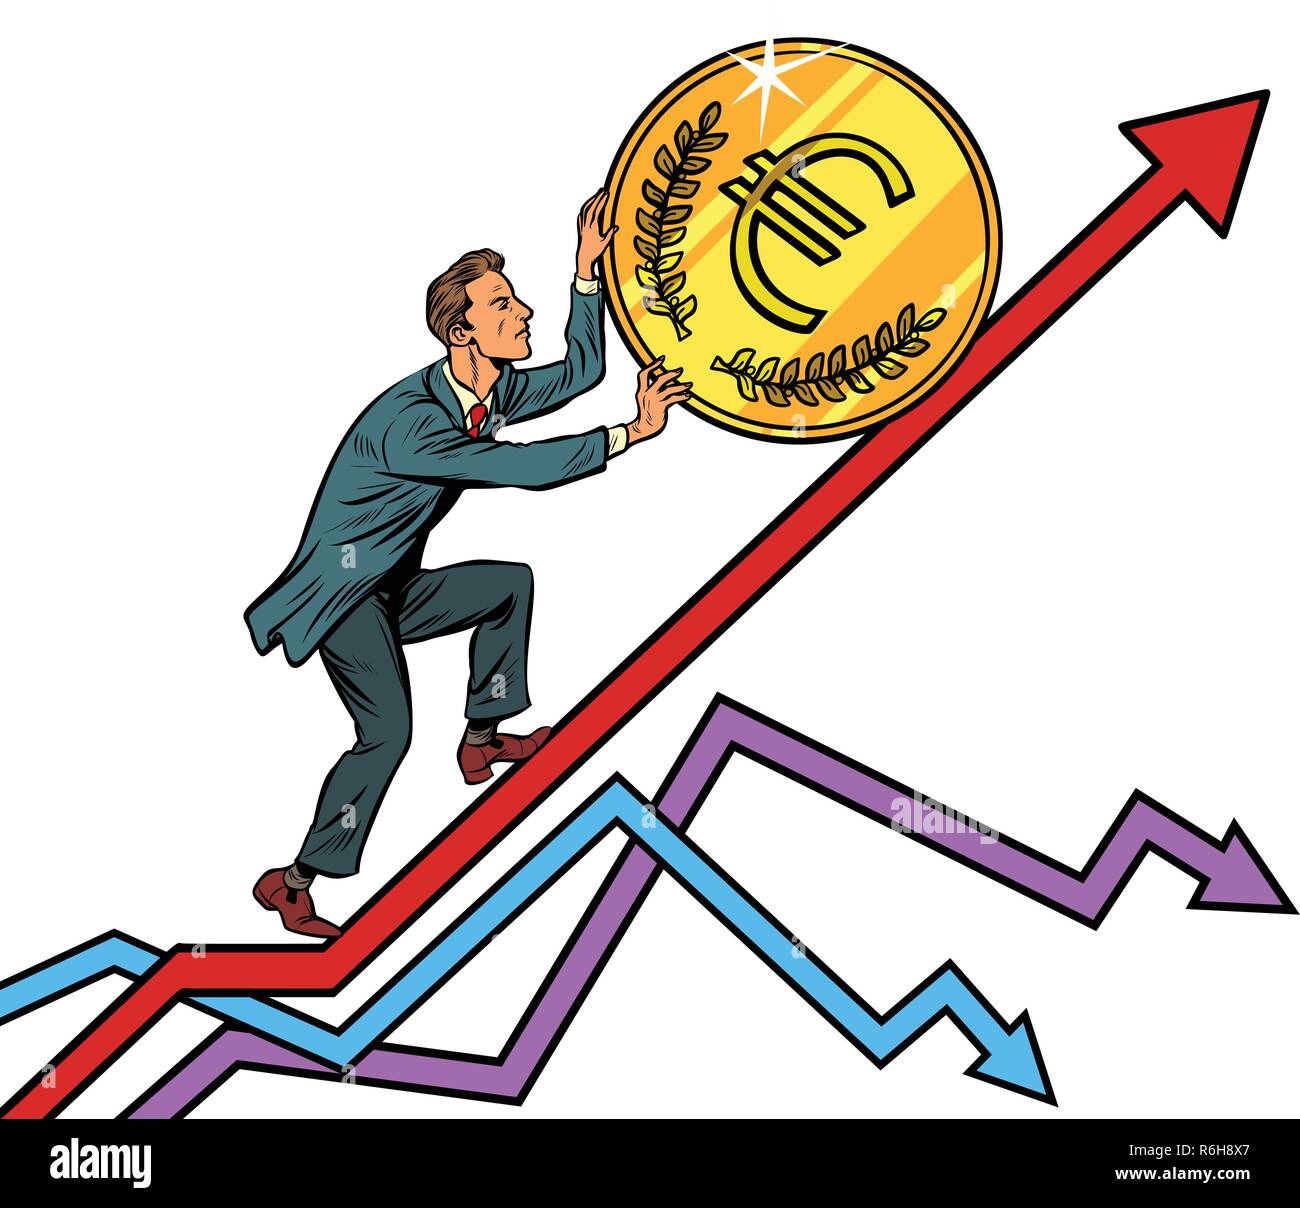 businessman roll a euro coin up. isolate on white background. Pop art retro vector illustration vintage kitsch Stock Vector